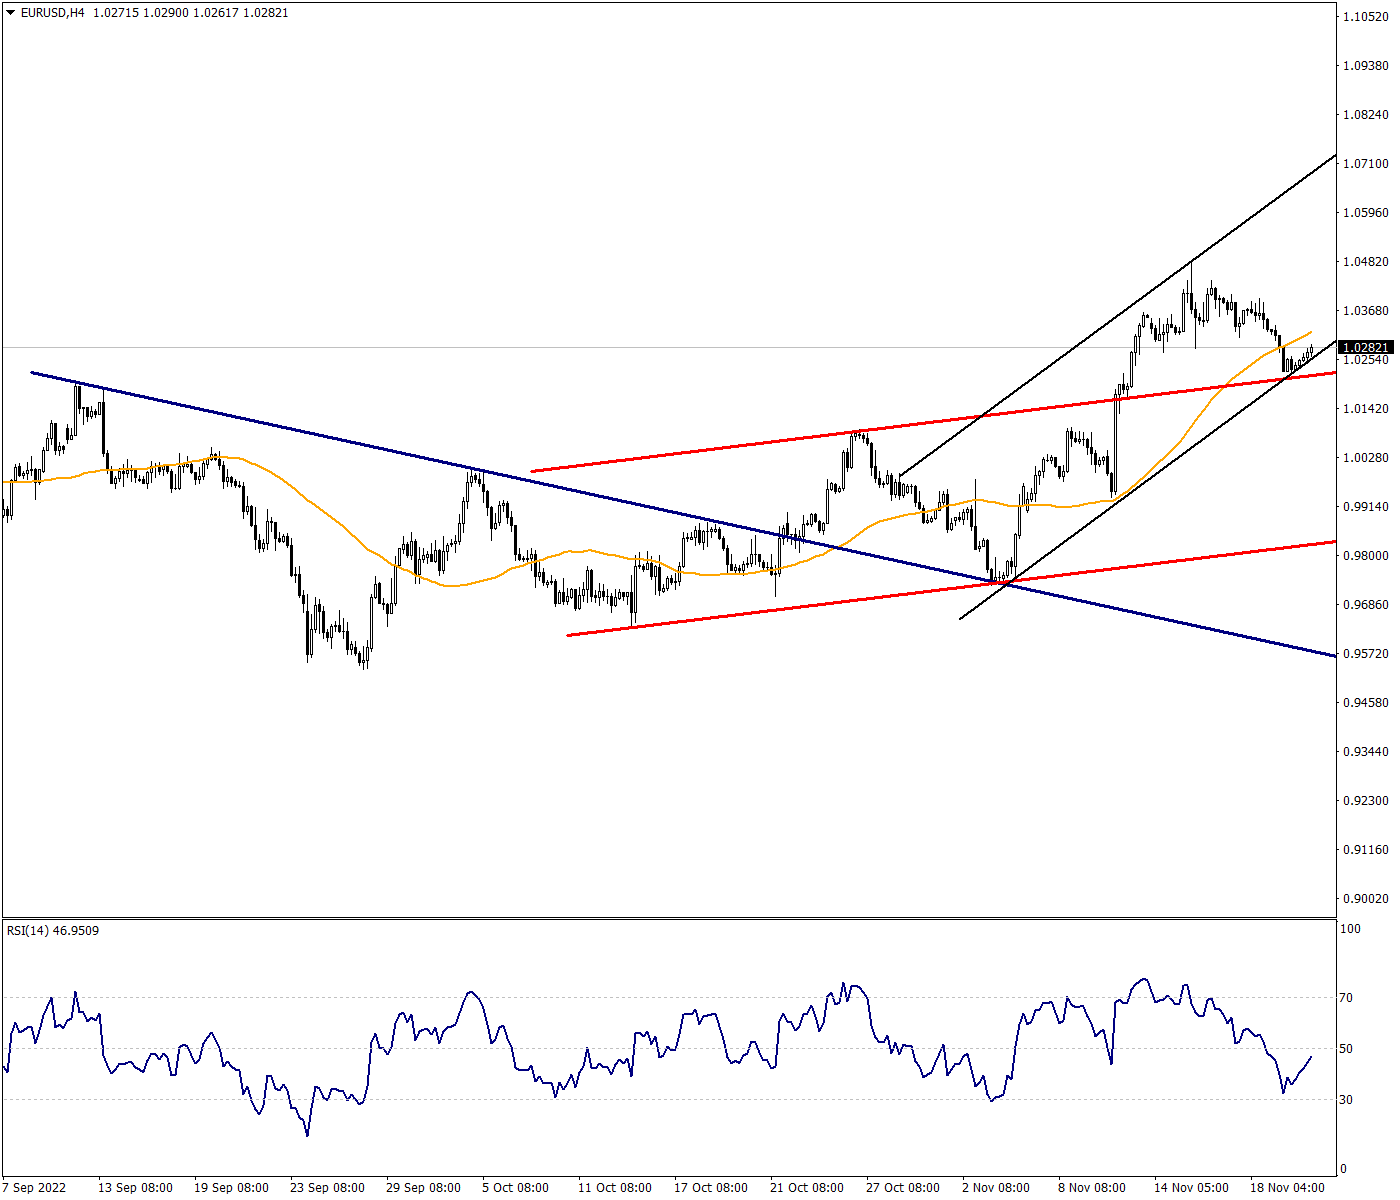 EURUSD Continues to Cling to the Rising Channel